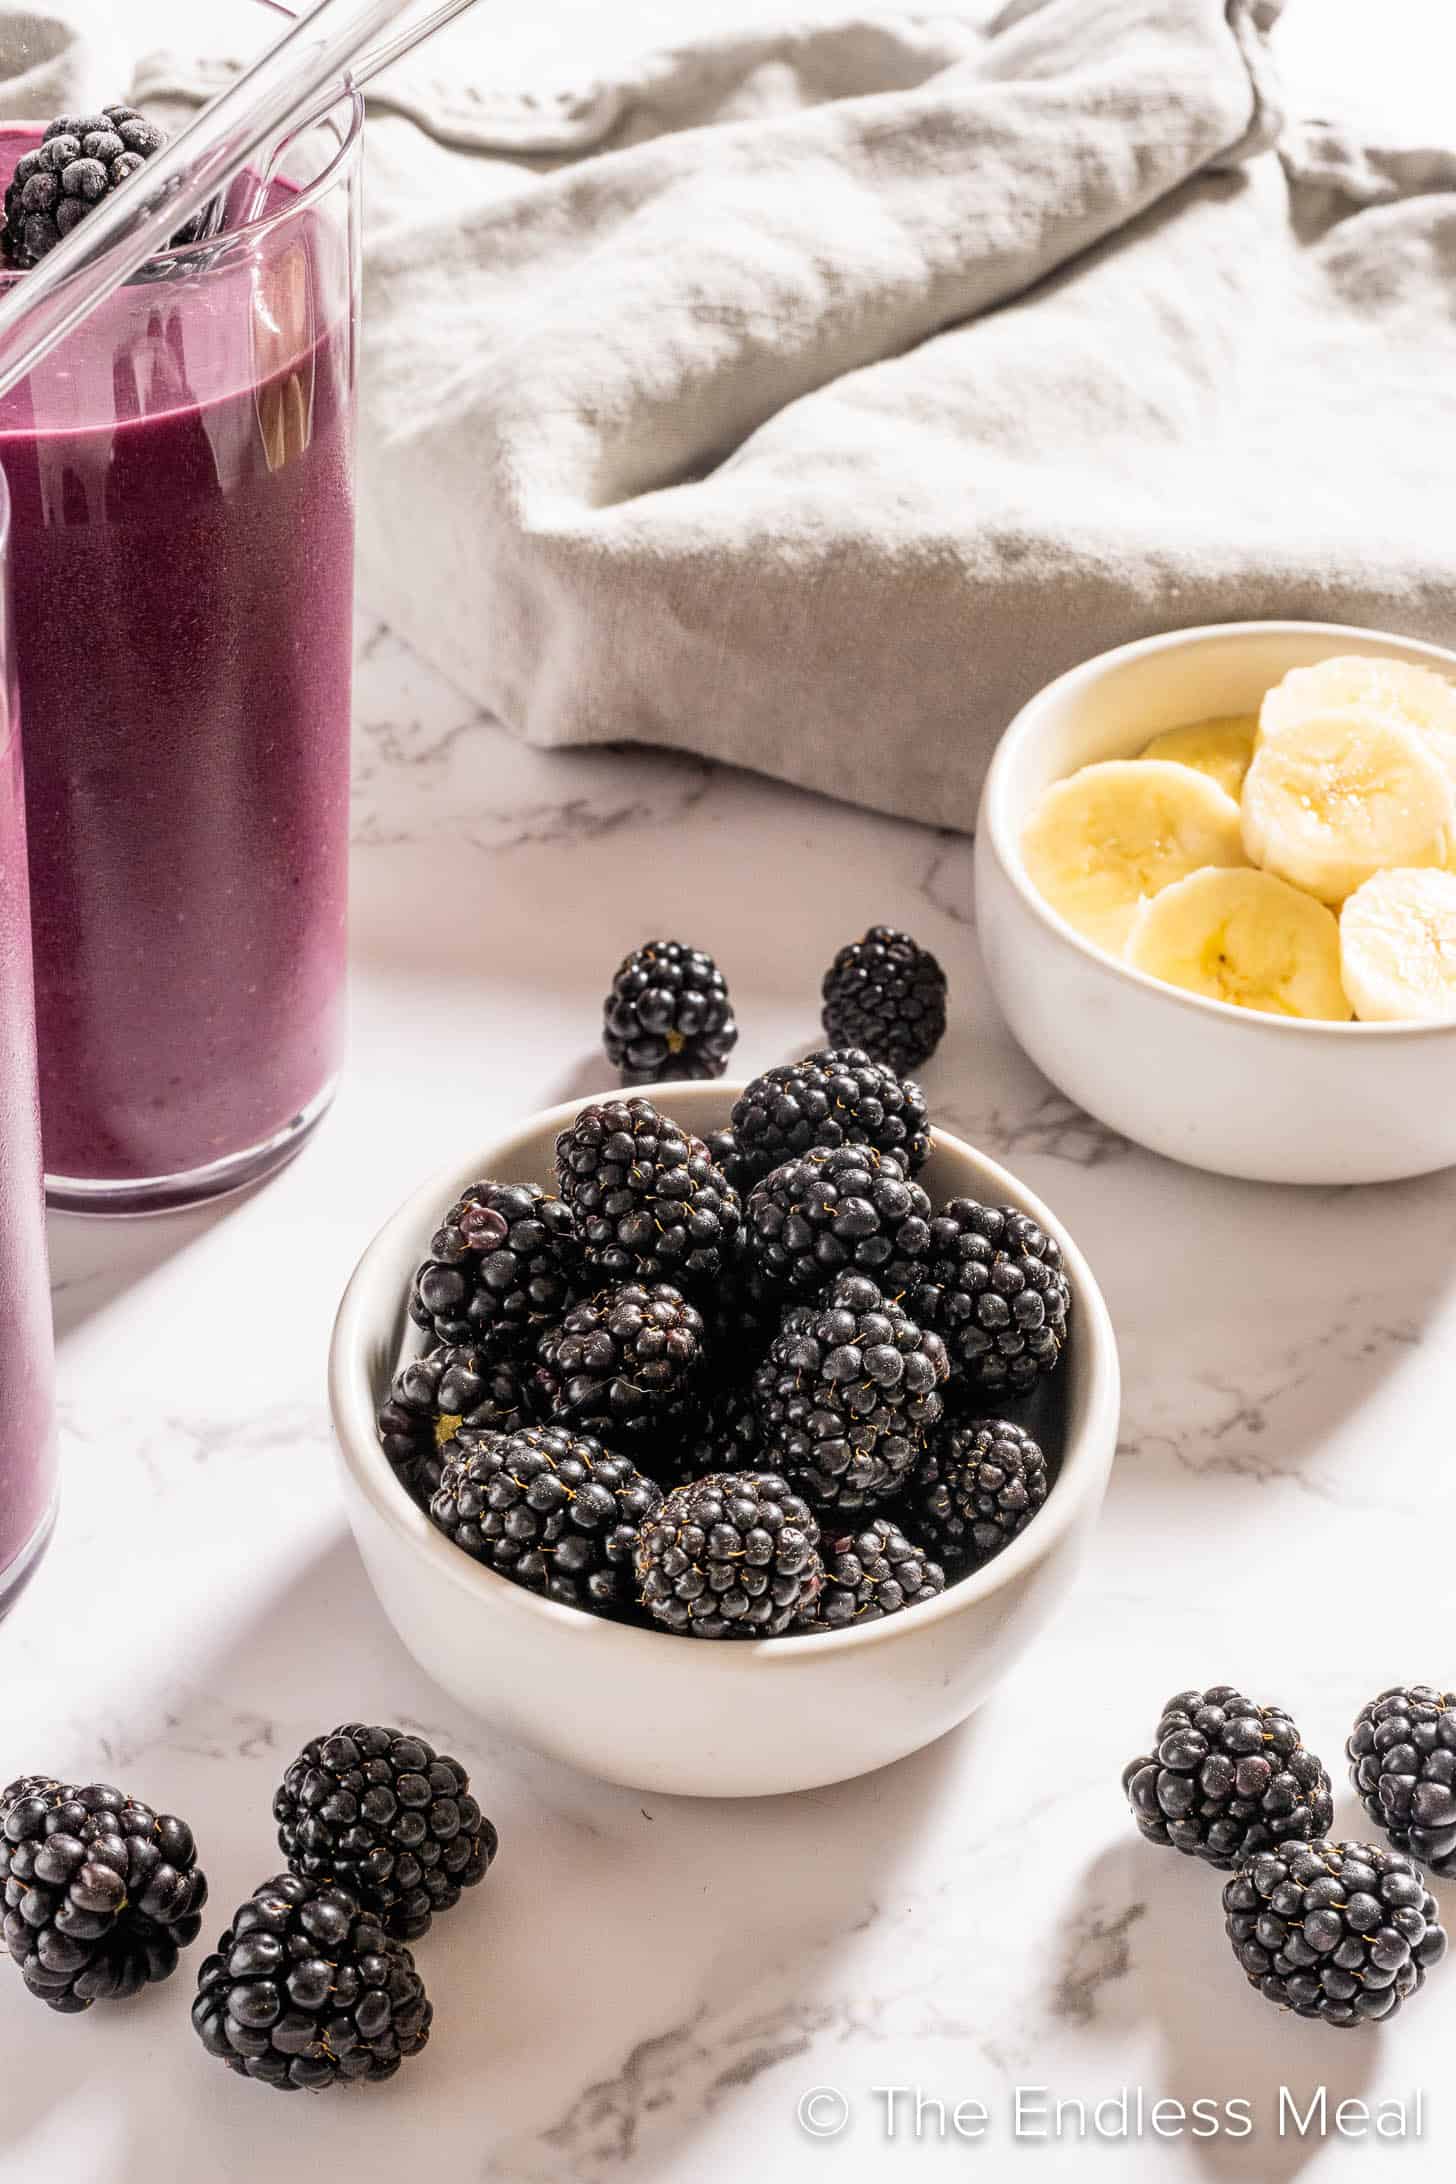 A bowl of blackberries next to a smoothie